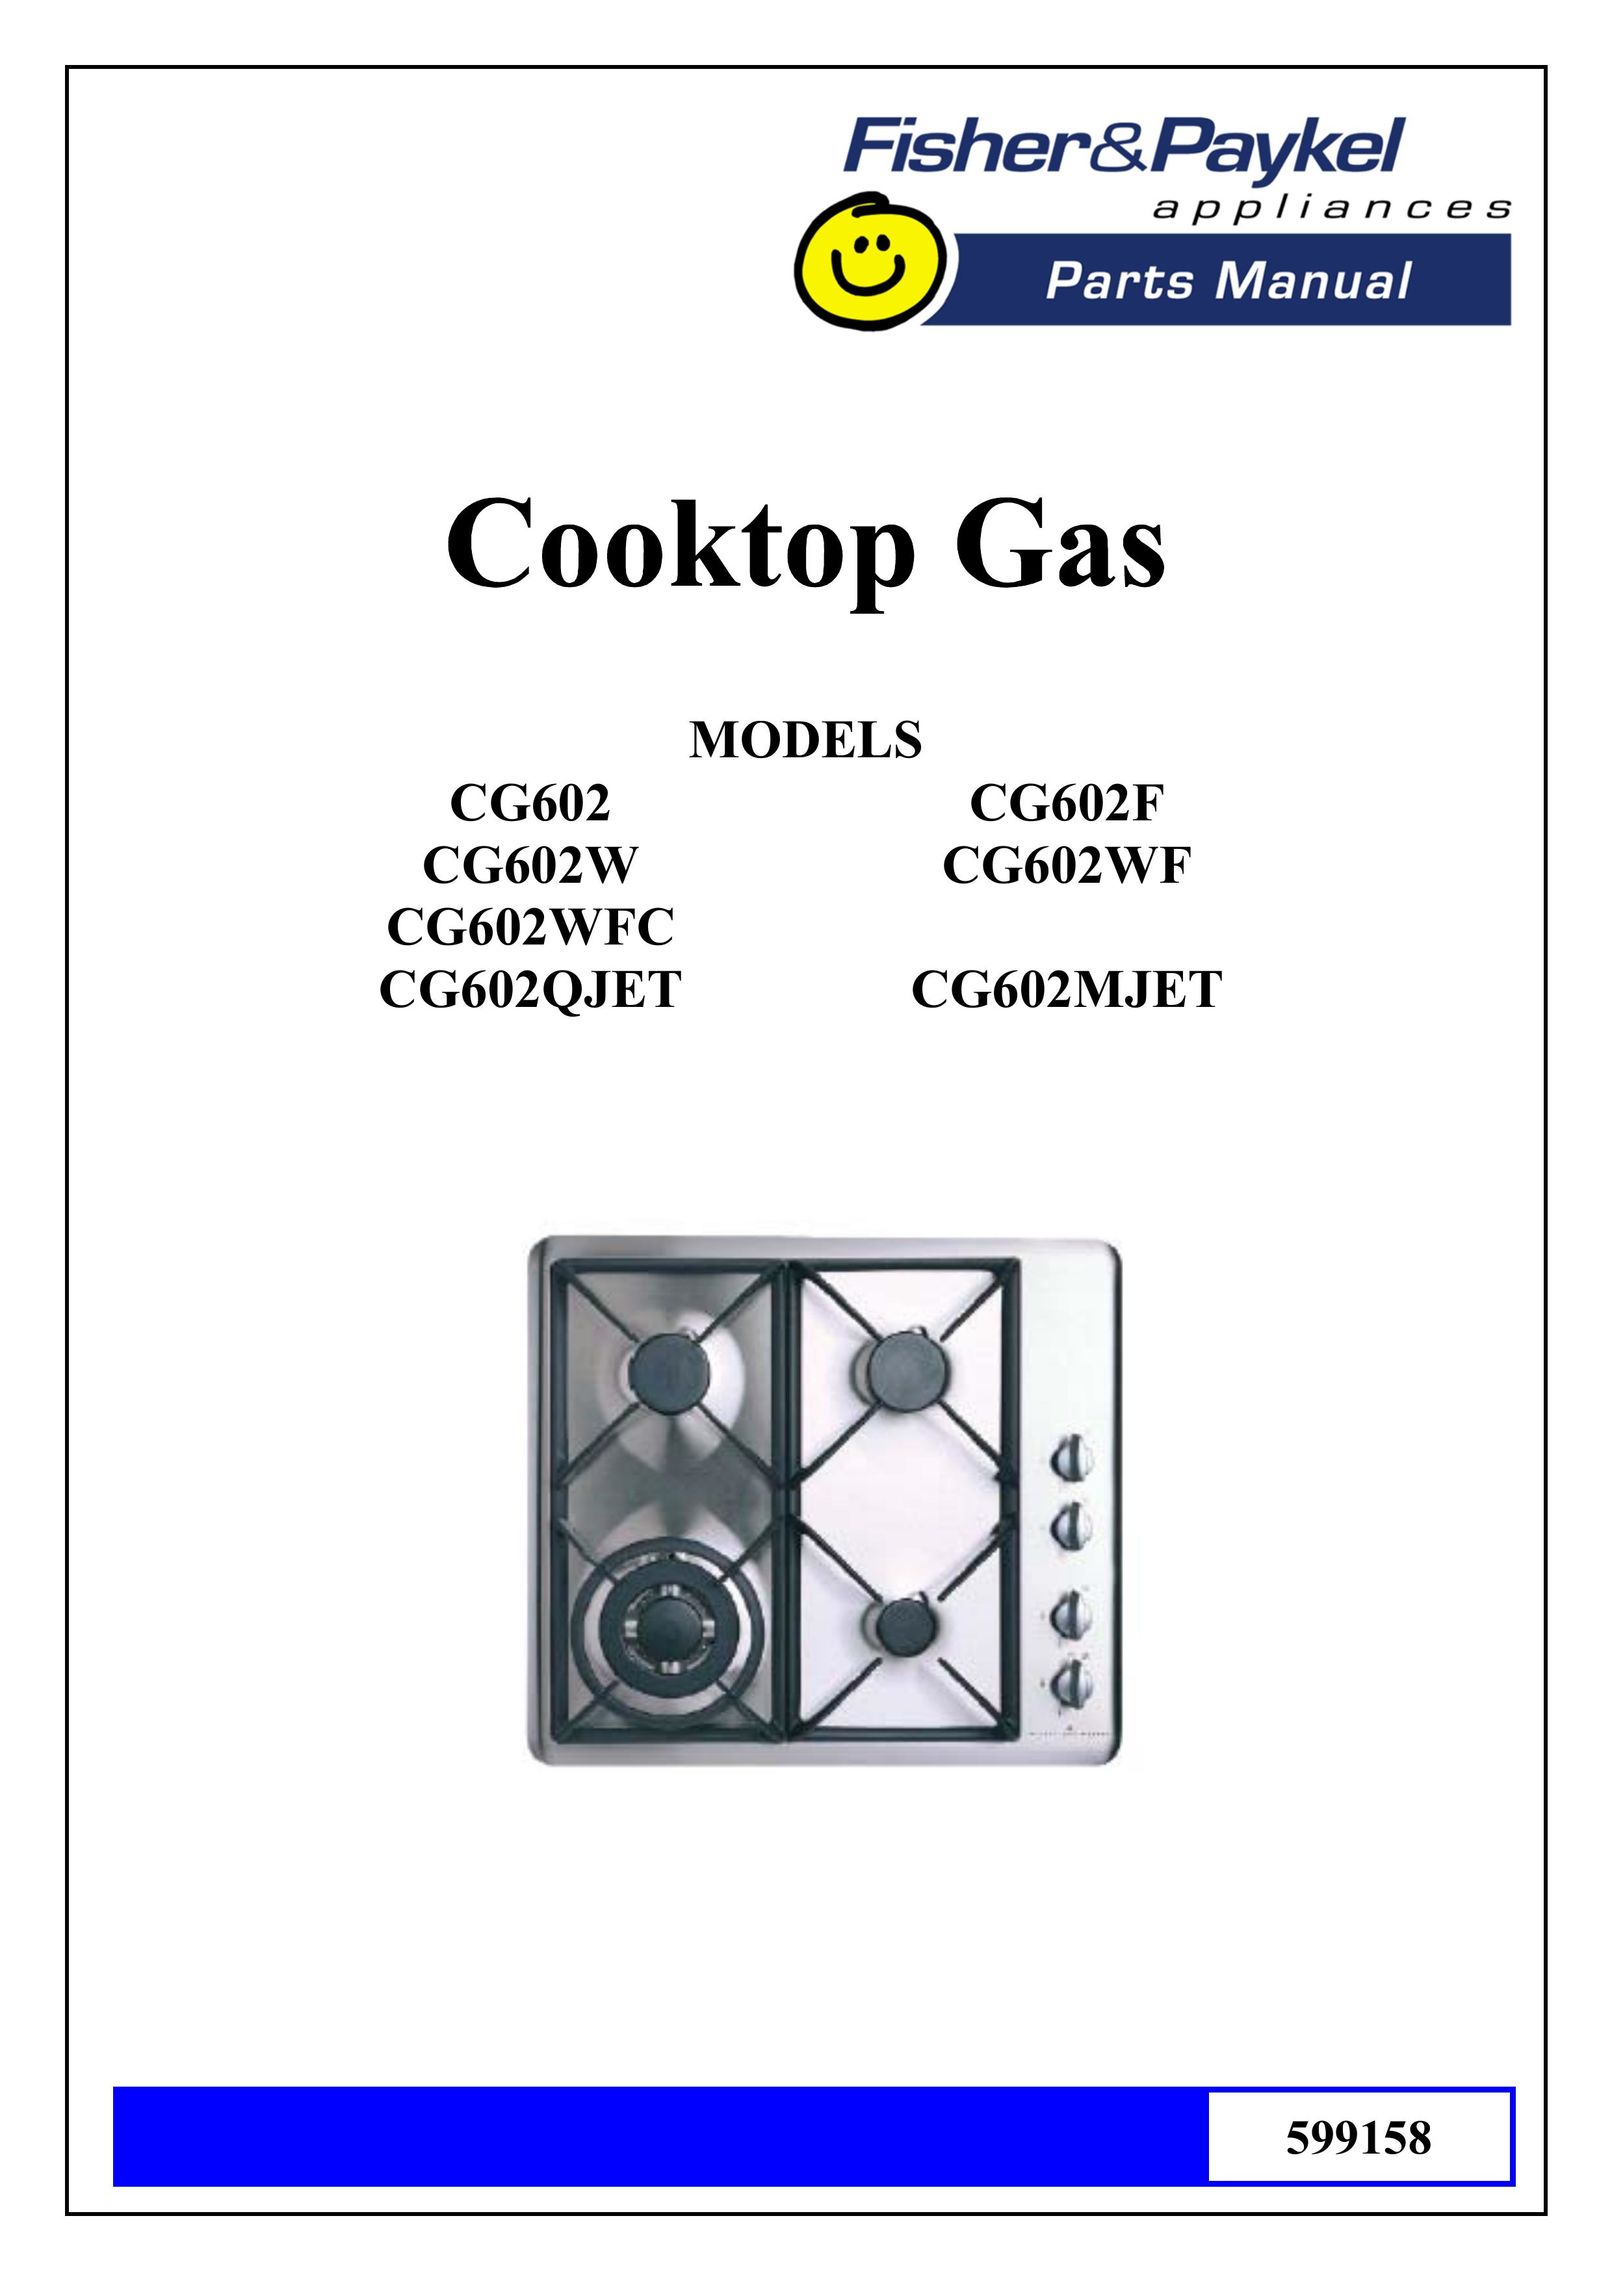 Fisher & Paykel CG602WFC Cooktop User Manual